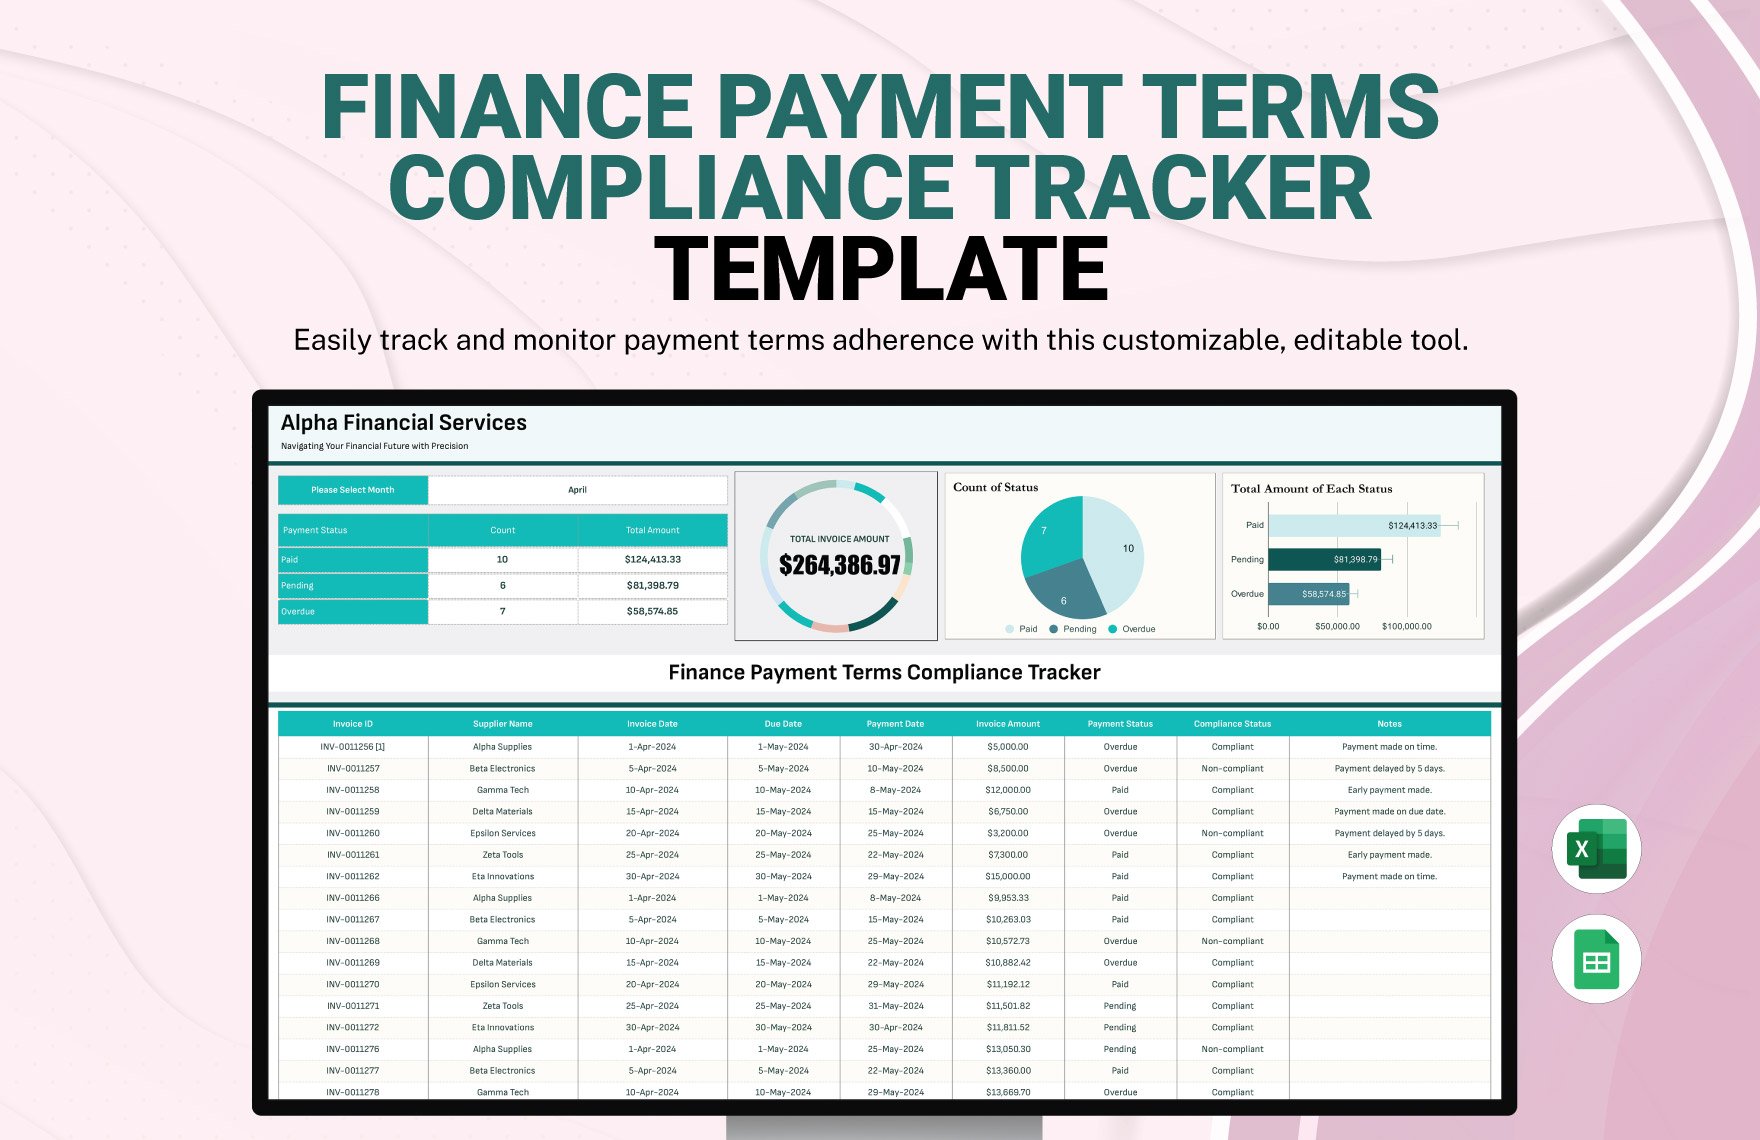 Finance Payment Terms Compliance Tracker Template in Excel, Google Sheets